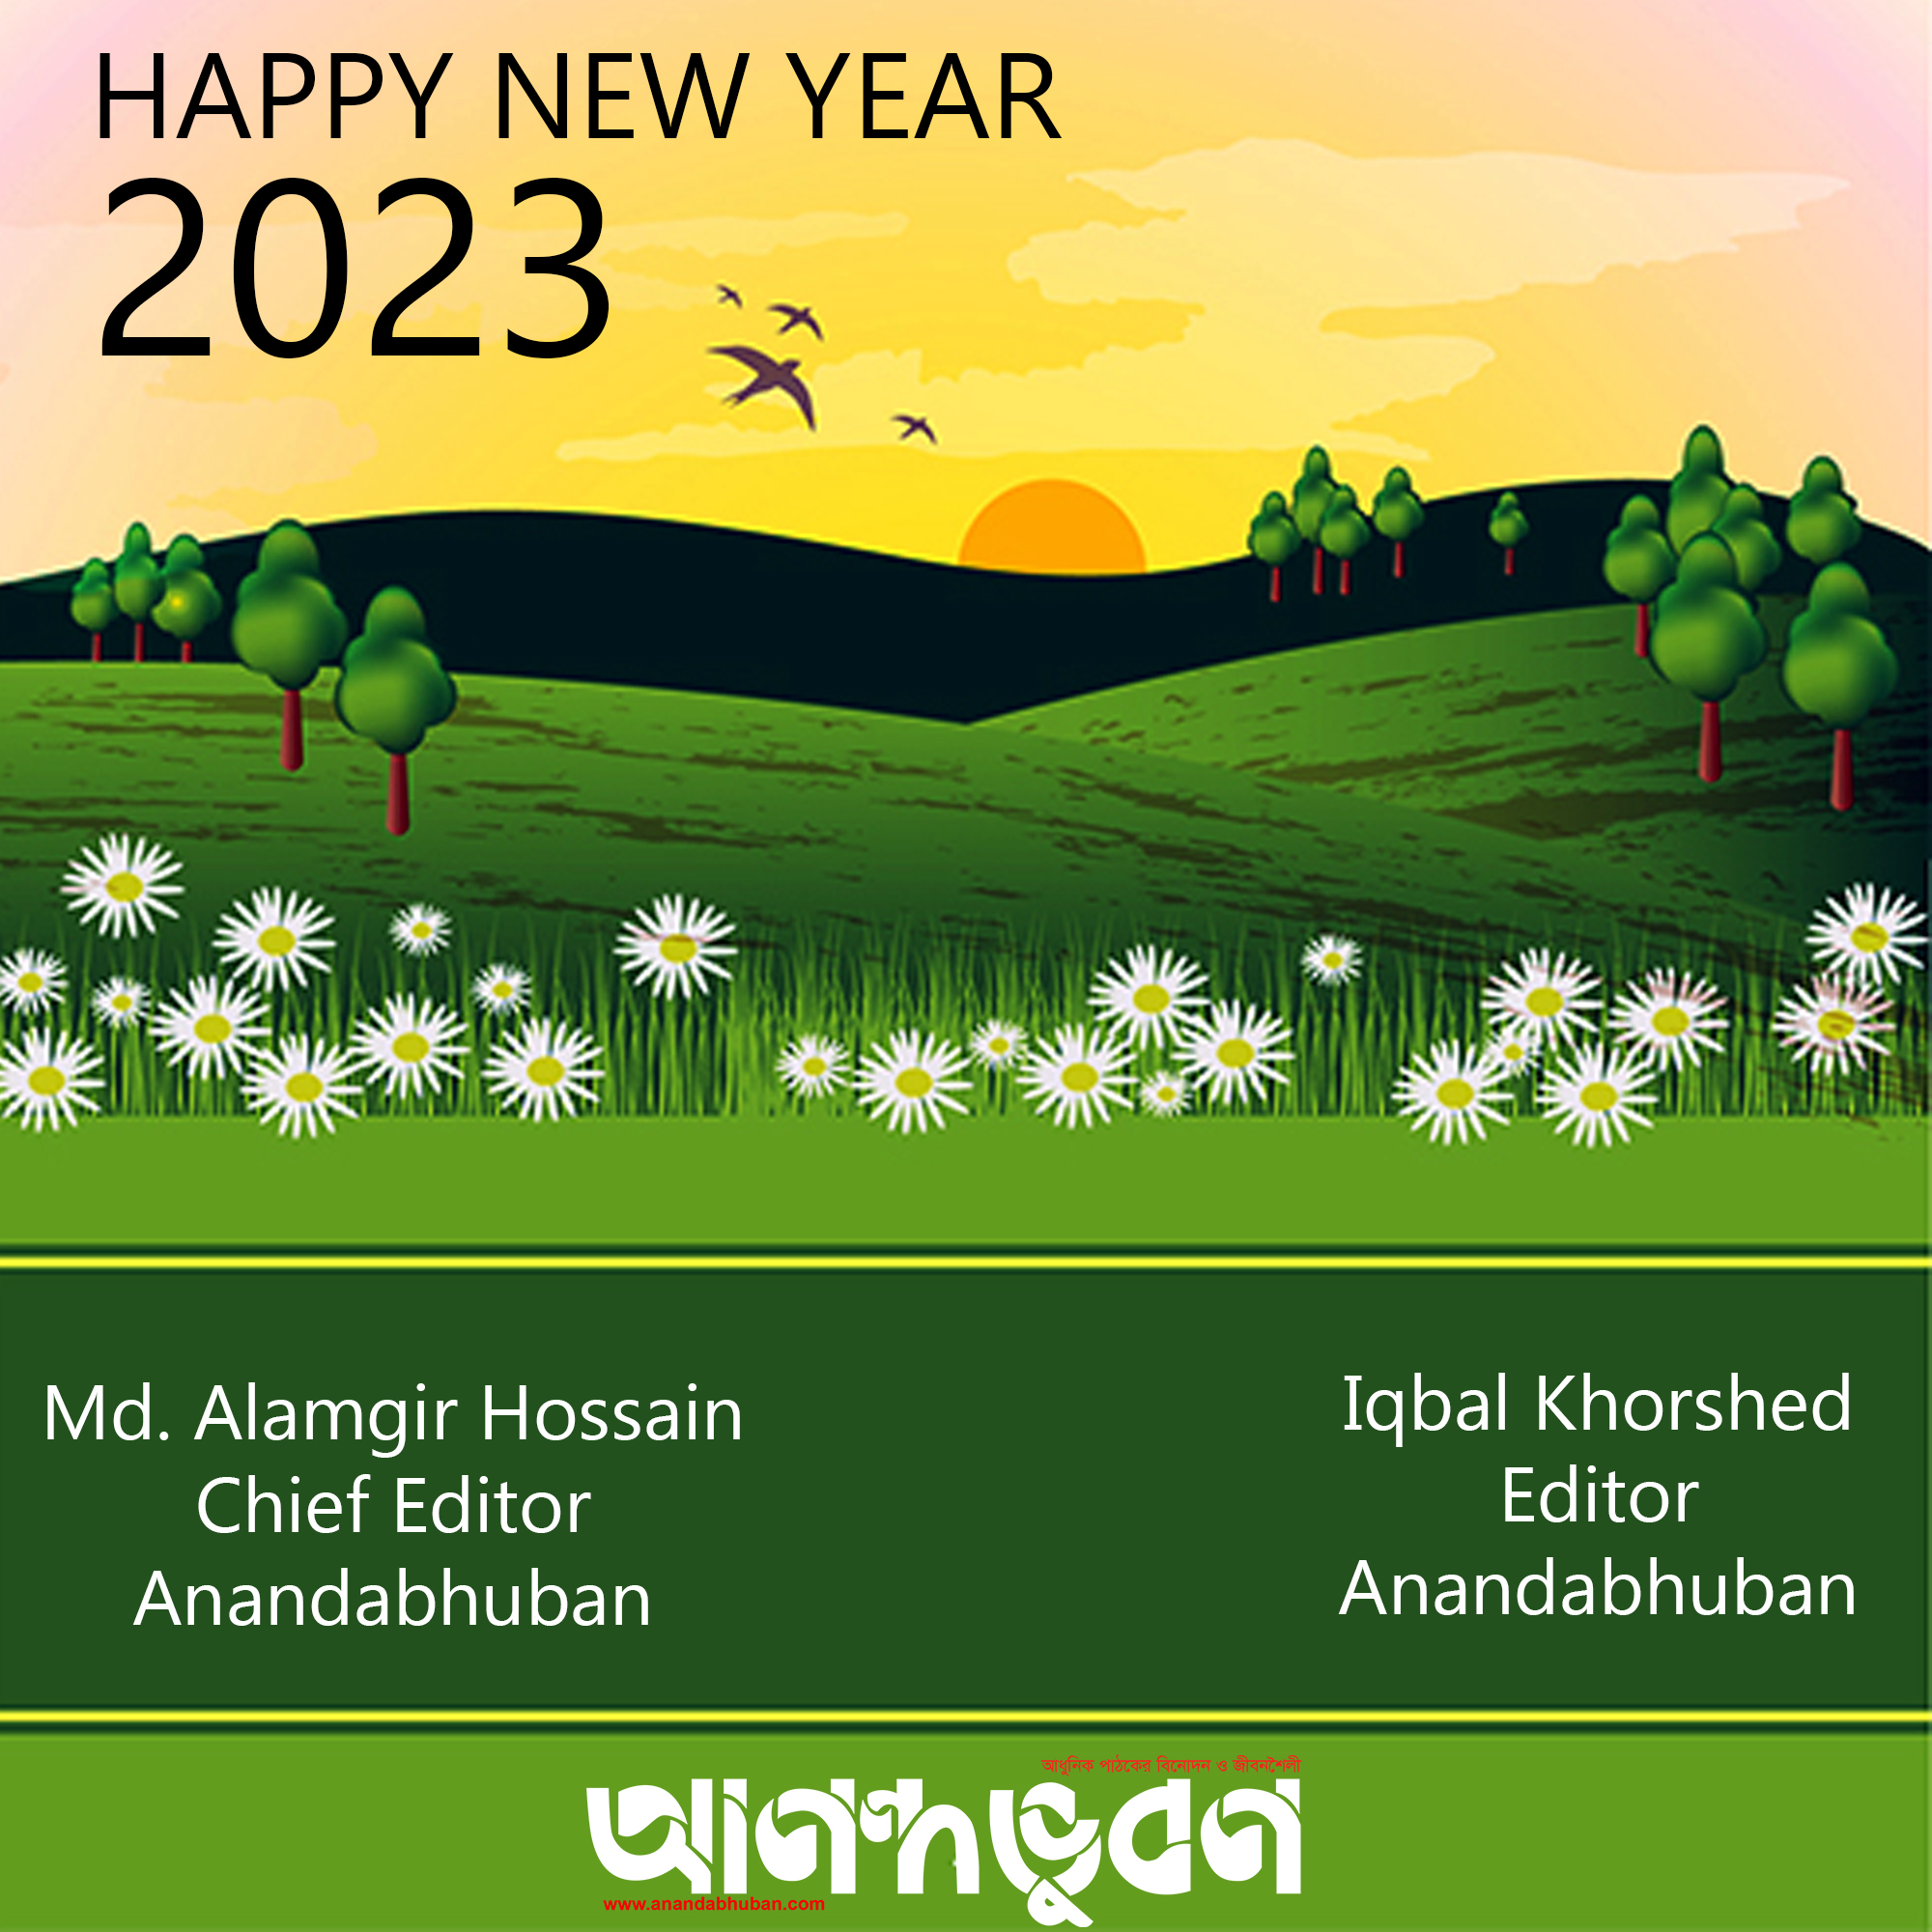 Happy New Year 2023. May the new year bring happiness and good health